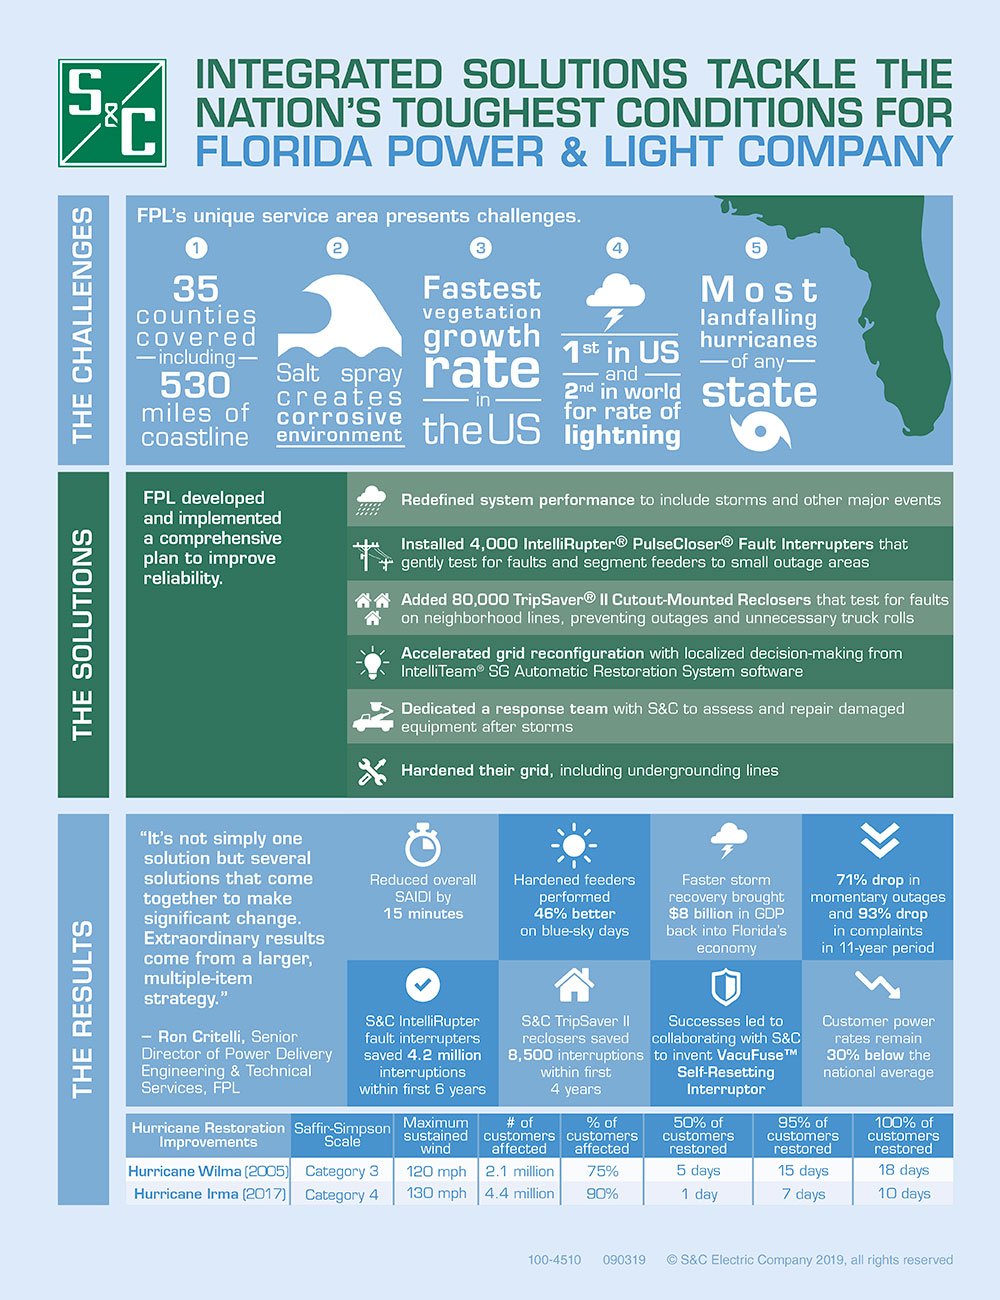 Integrated Solutions Tackle the Nation's Toughest Conditions for Flordia Power and Light Company